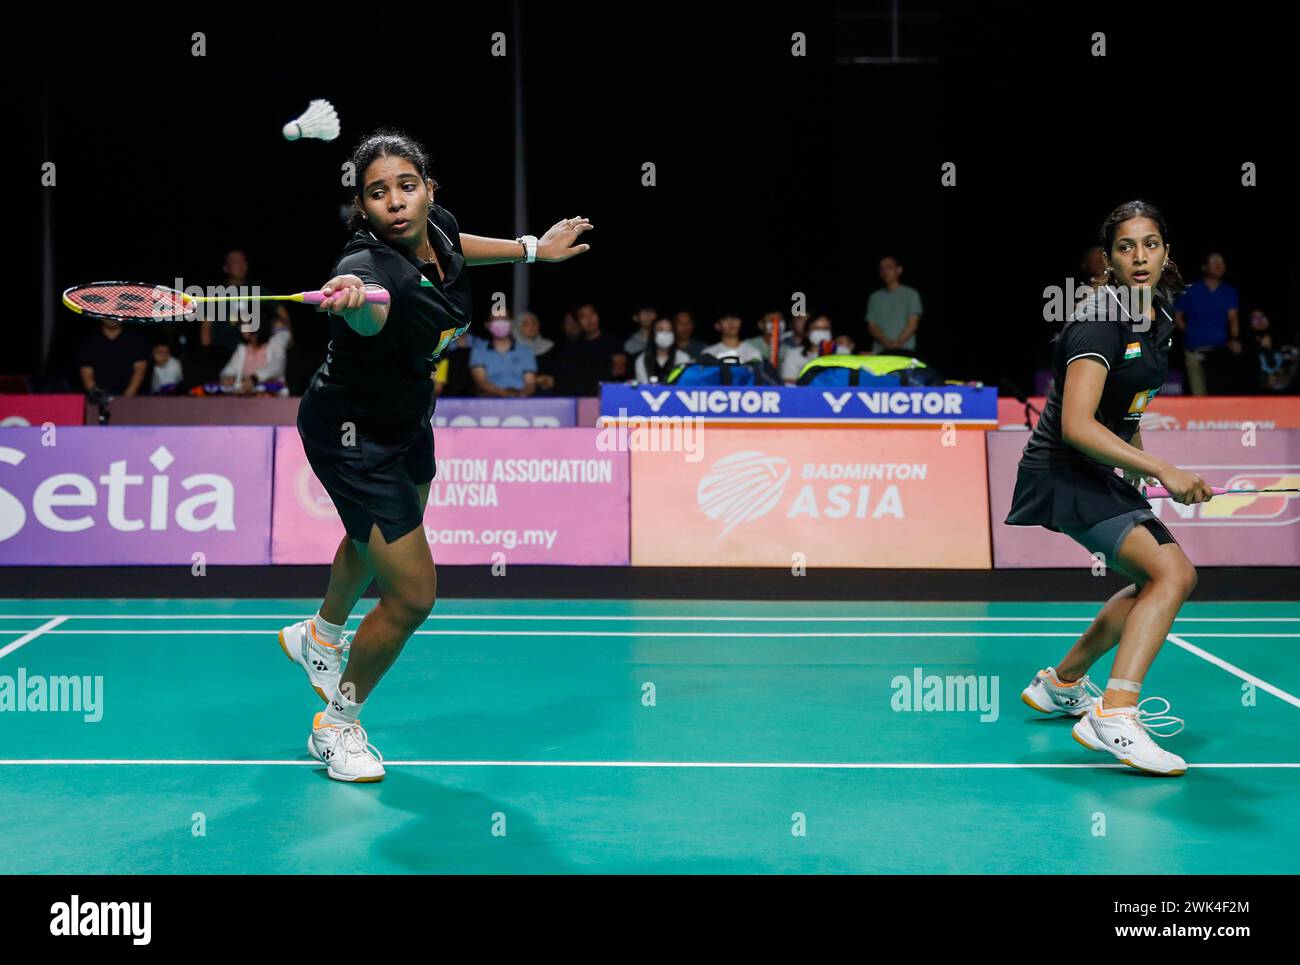 Kuala Lumpur, Malaysia. 18th Feb, 2024. Gayatri Gopichand Pullela and Treesa Jolly (L) of India in action against Jongkolphan Kititharakul and Rawinda Projongjai of Thailand (not pictured) during the Women's Doubles final match at the Badminton Asia Team Championships 2024 at Setia City Convention Centre in Shah Alam. Gayatri Gopichand Pullela and Treesa Jolly won with scores; 21/18/21 : 16/21/16. (Photo by Wong Fok Loy/SOPA Images/Sipa USA) Credit: Sipa USA/Alamy Live News Stock Photo